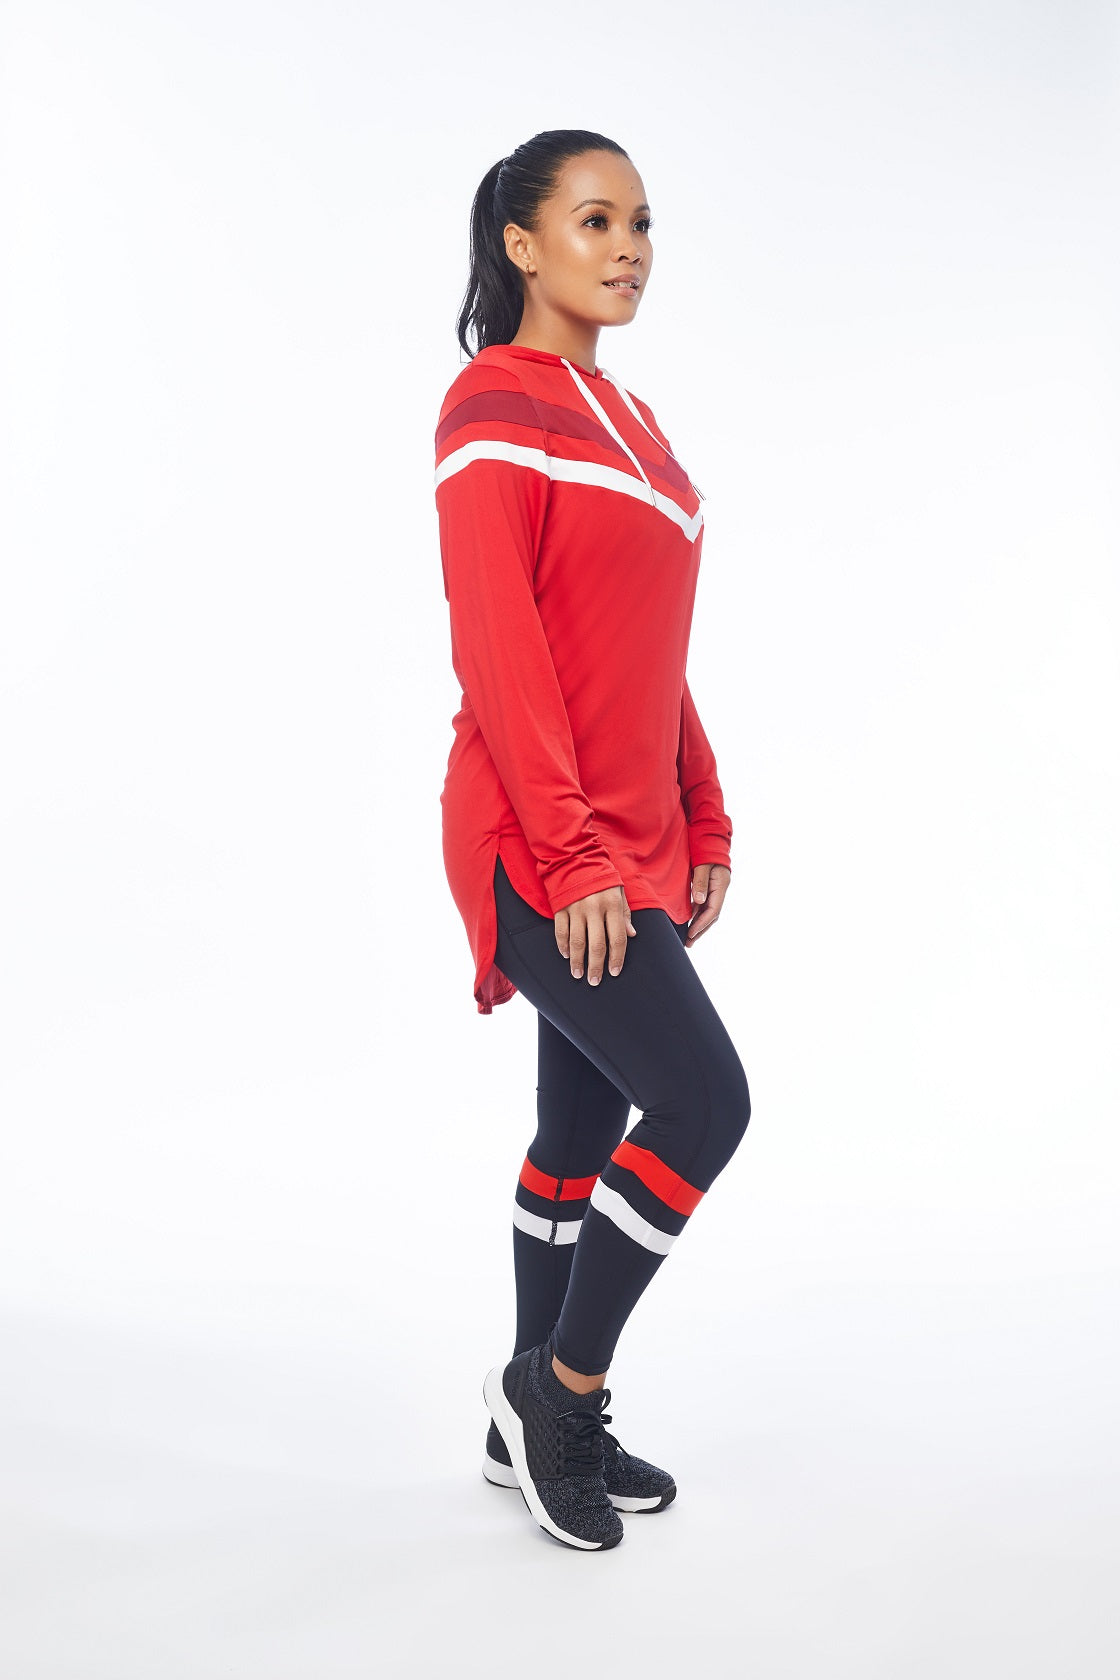 RISE UP Long Sleeve Top (Red)